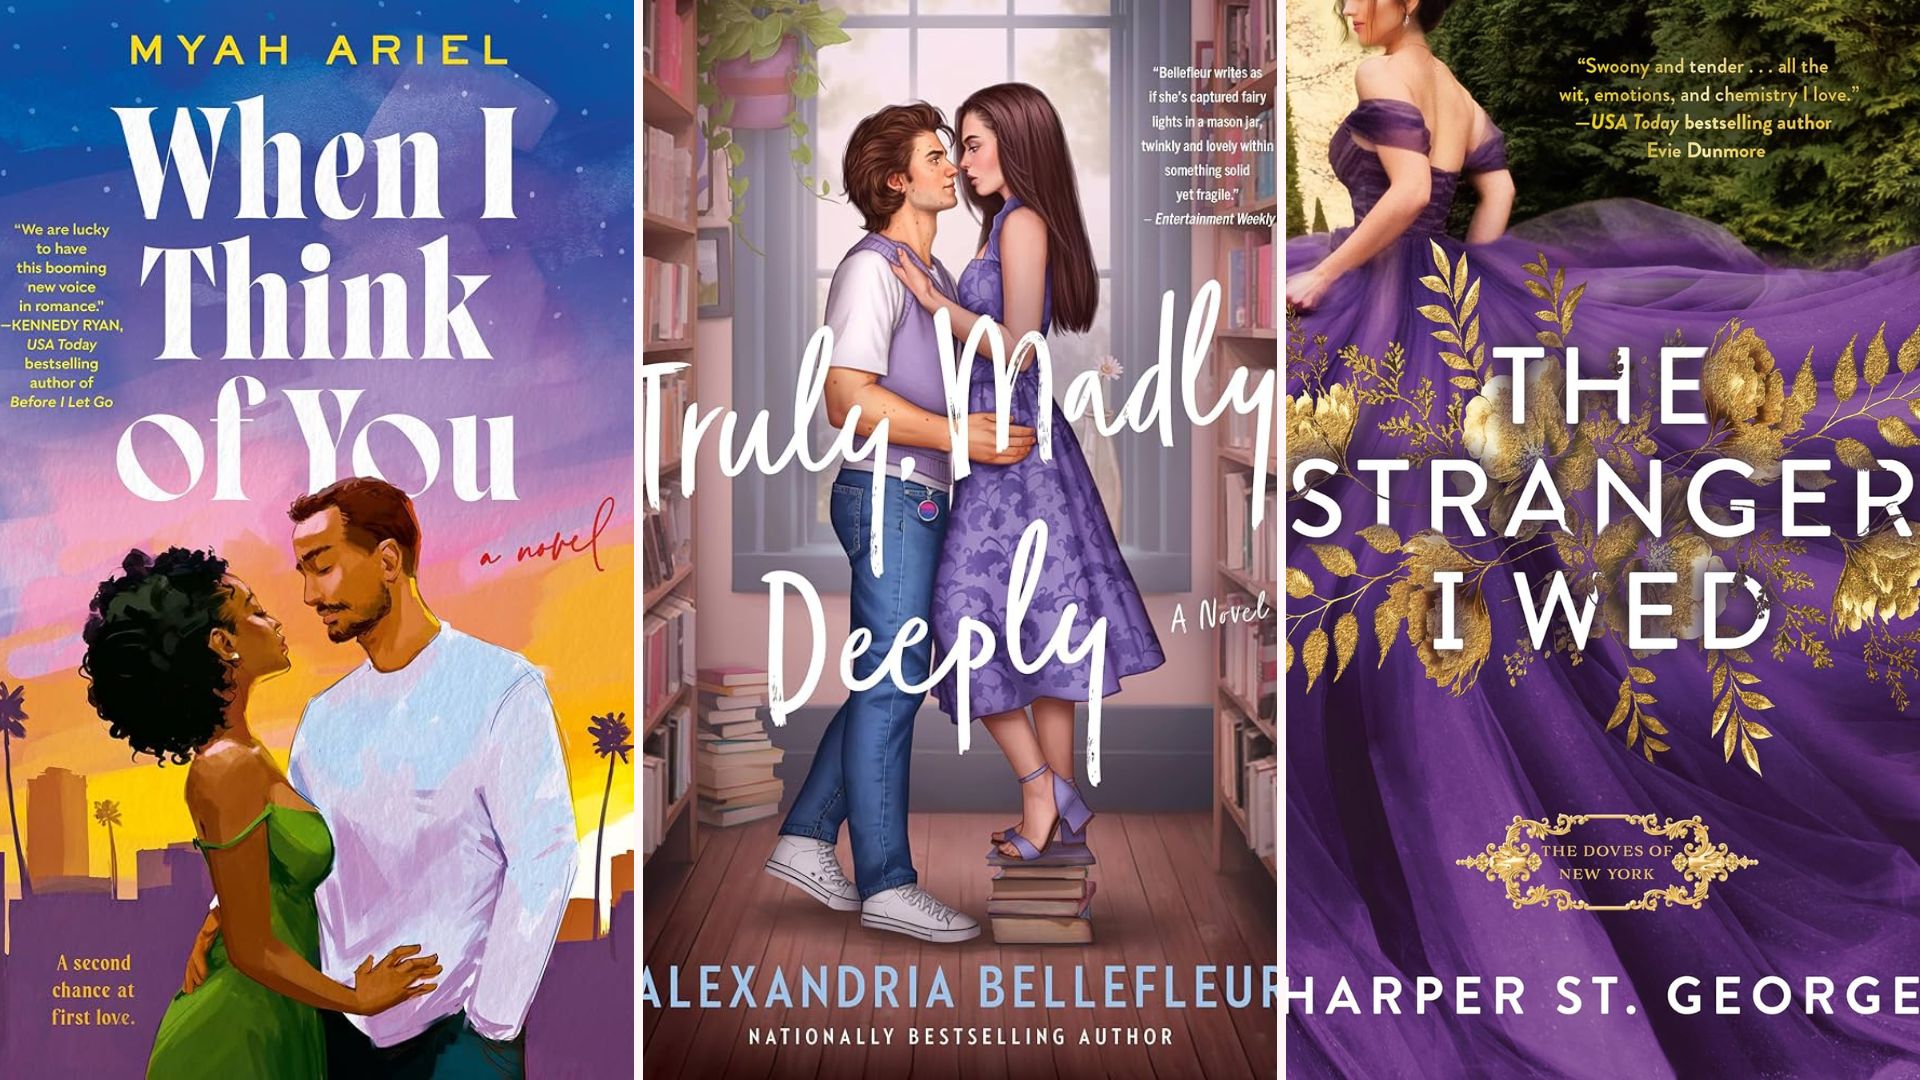 Book covers for When I Think of You, Truly Madly Deeply, and The Stranger I Wed